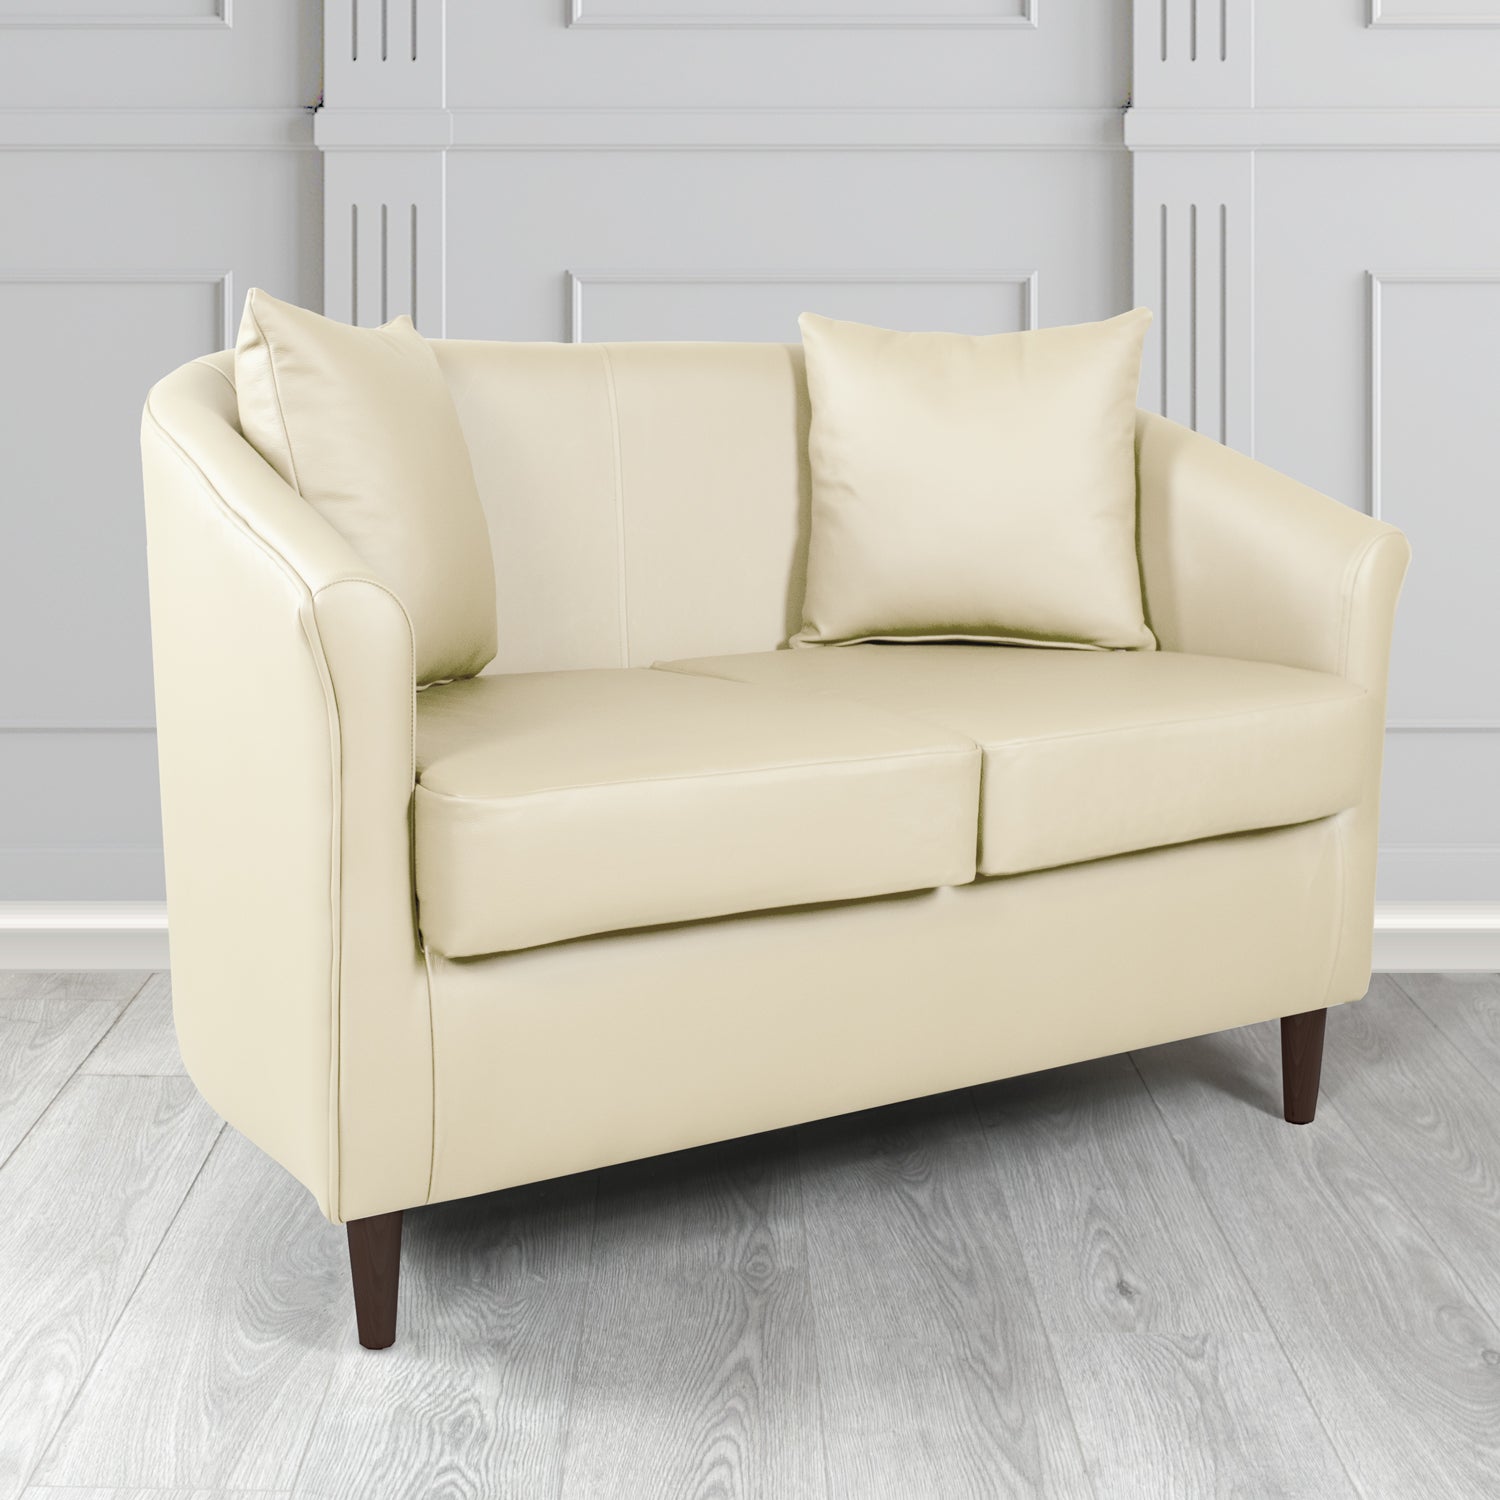 St Tropez 2 Seater Tub Sofa in Madrid Cream Faux Leather - The Tub Chair Shop